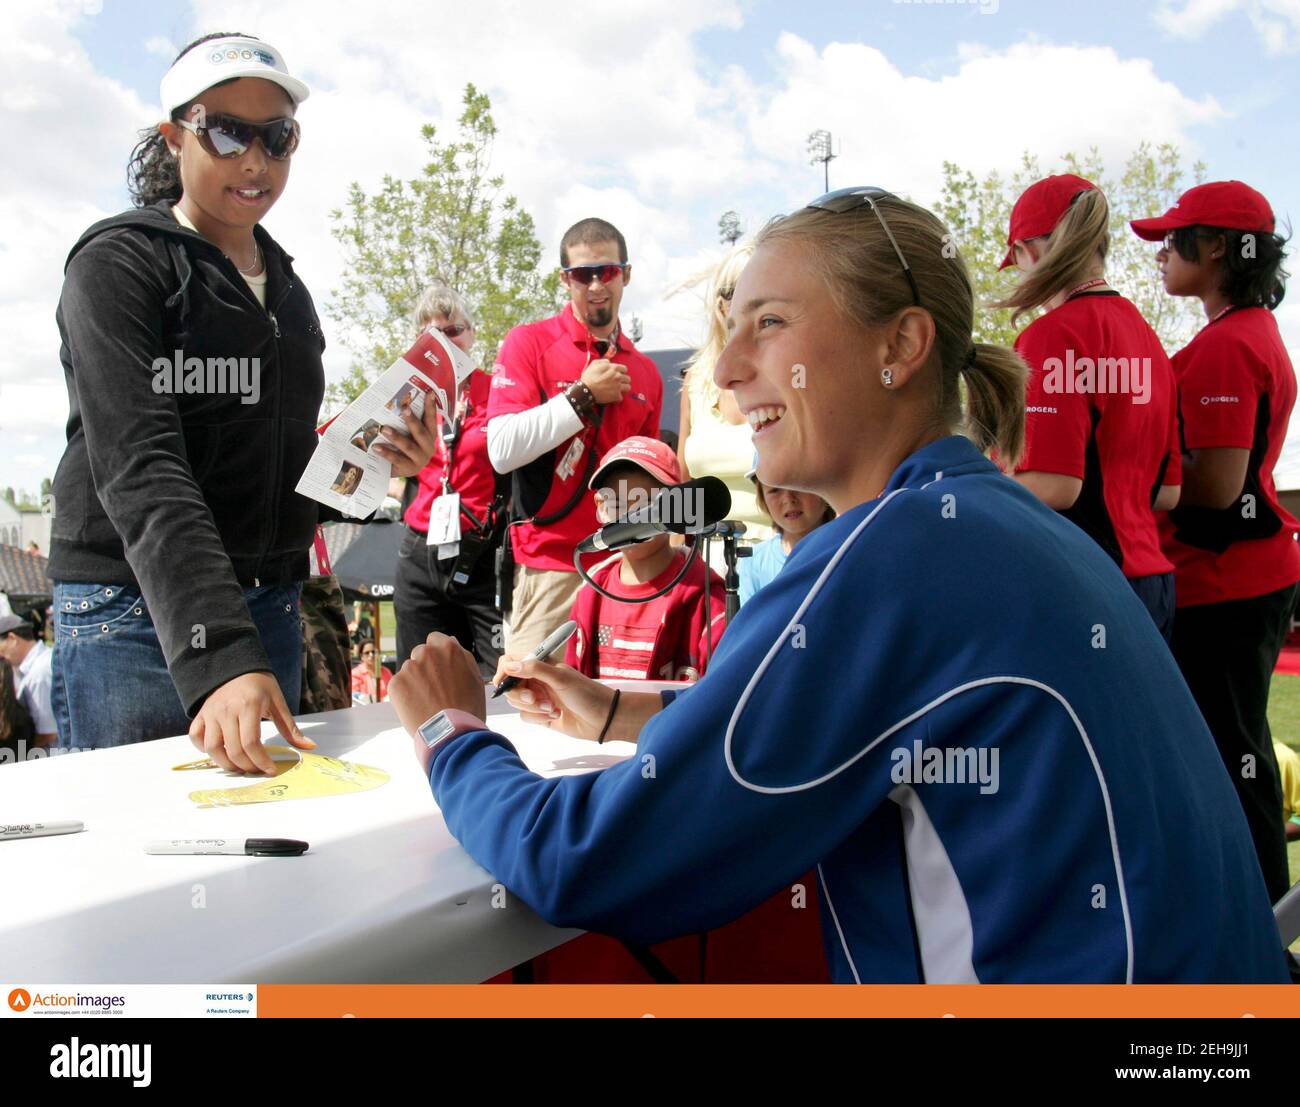 Tennis - Sony Ericsson WTA Tournament - Montreal, Canada - 13/8/06  Mara Santangelo of Italy (R) laughs while signing autographs during the second day at the Rogers Cup, Sony Ericsson WTA Tour  Mandatory Credit: Action Images / Chris Wattie  Livepic Stock Photo